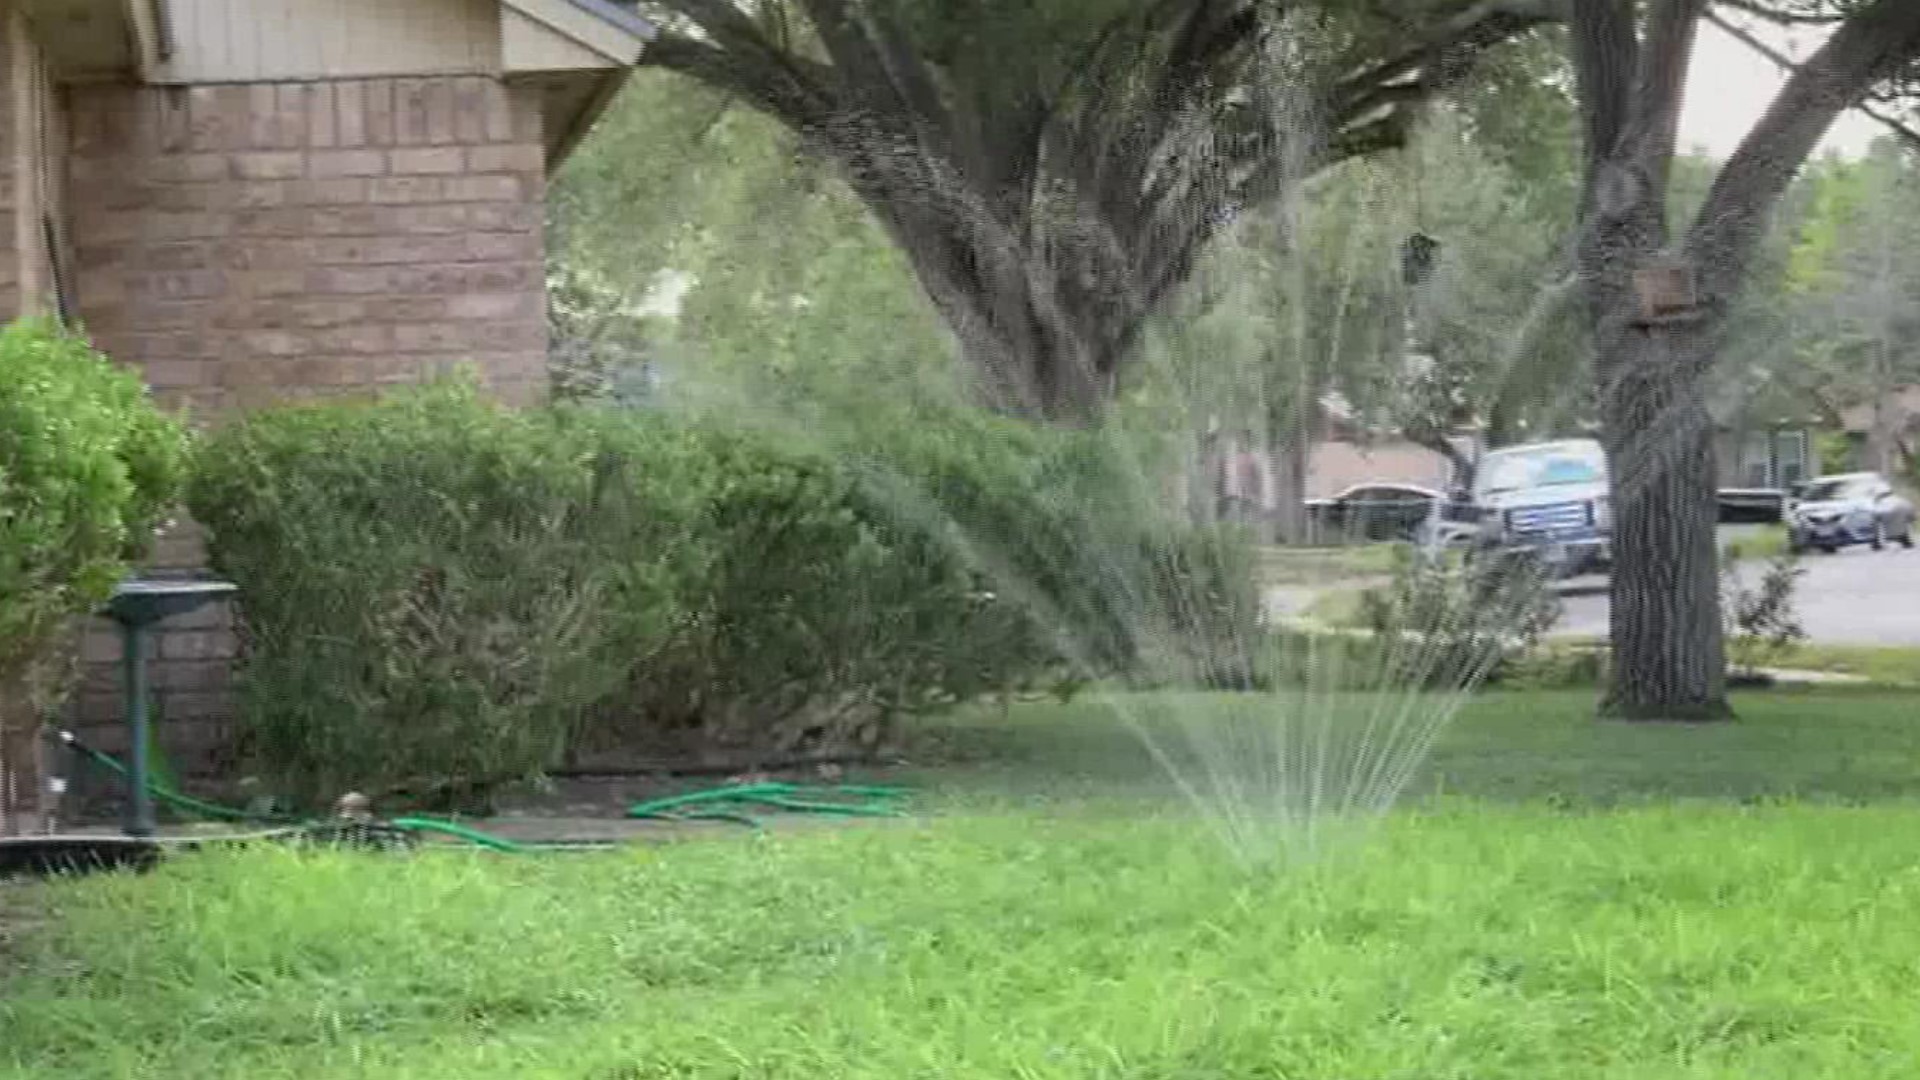 The City of Corpus Christi began issuing citations on Monday for people violating the drought contingency plan restrictions on water usage.